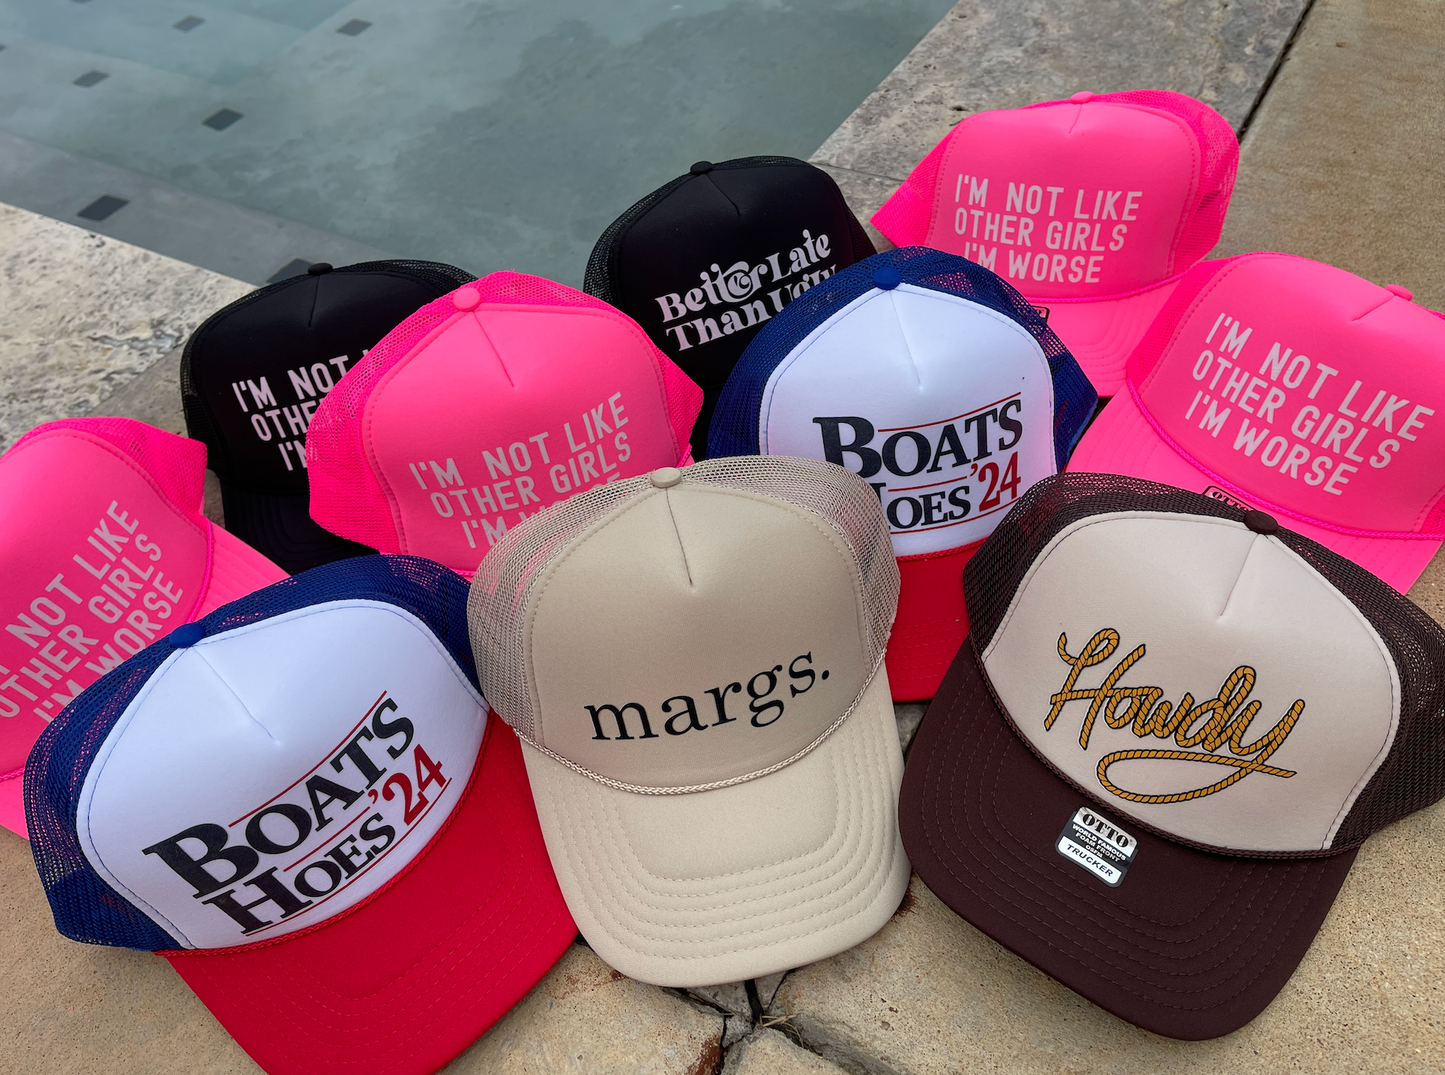 I'm Not Like Other Girls - I'm Worse Pink Trucker Hat/ Funny Gifts for Her